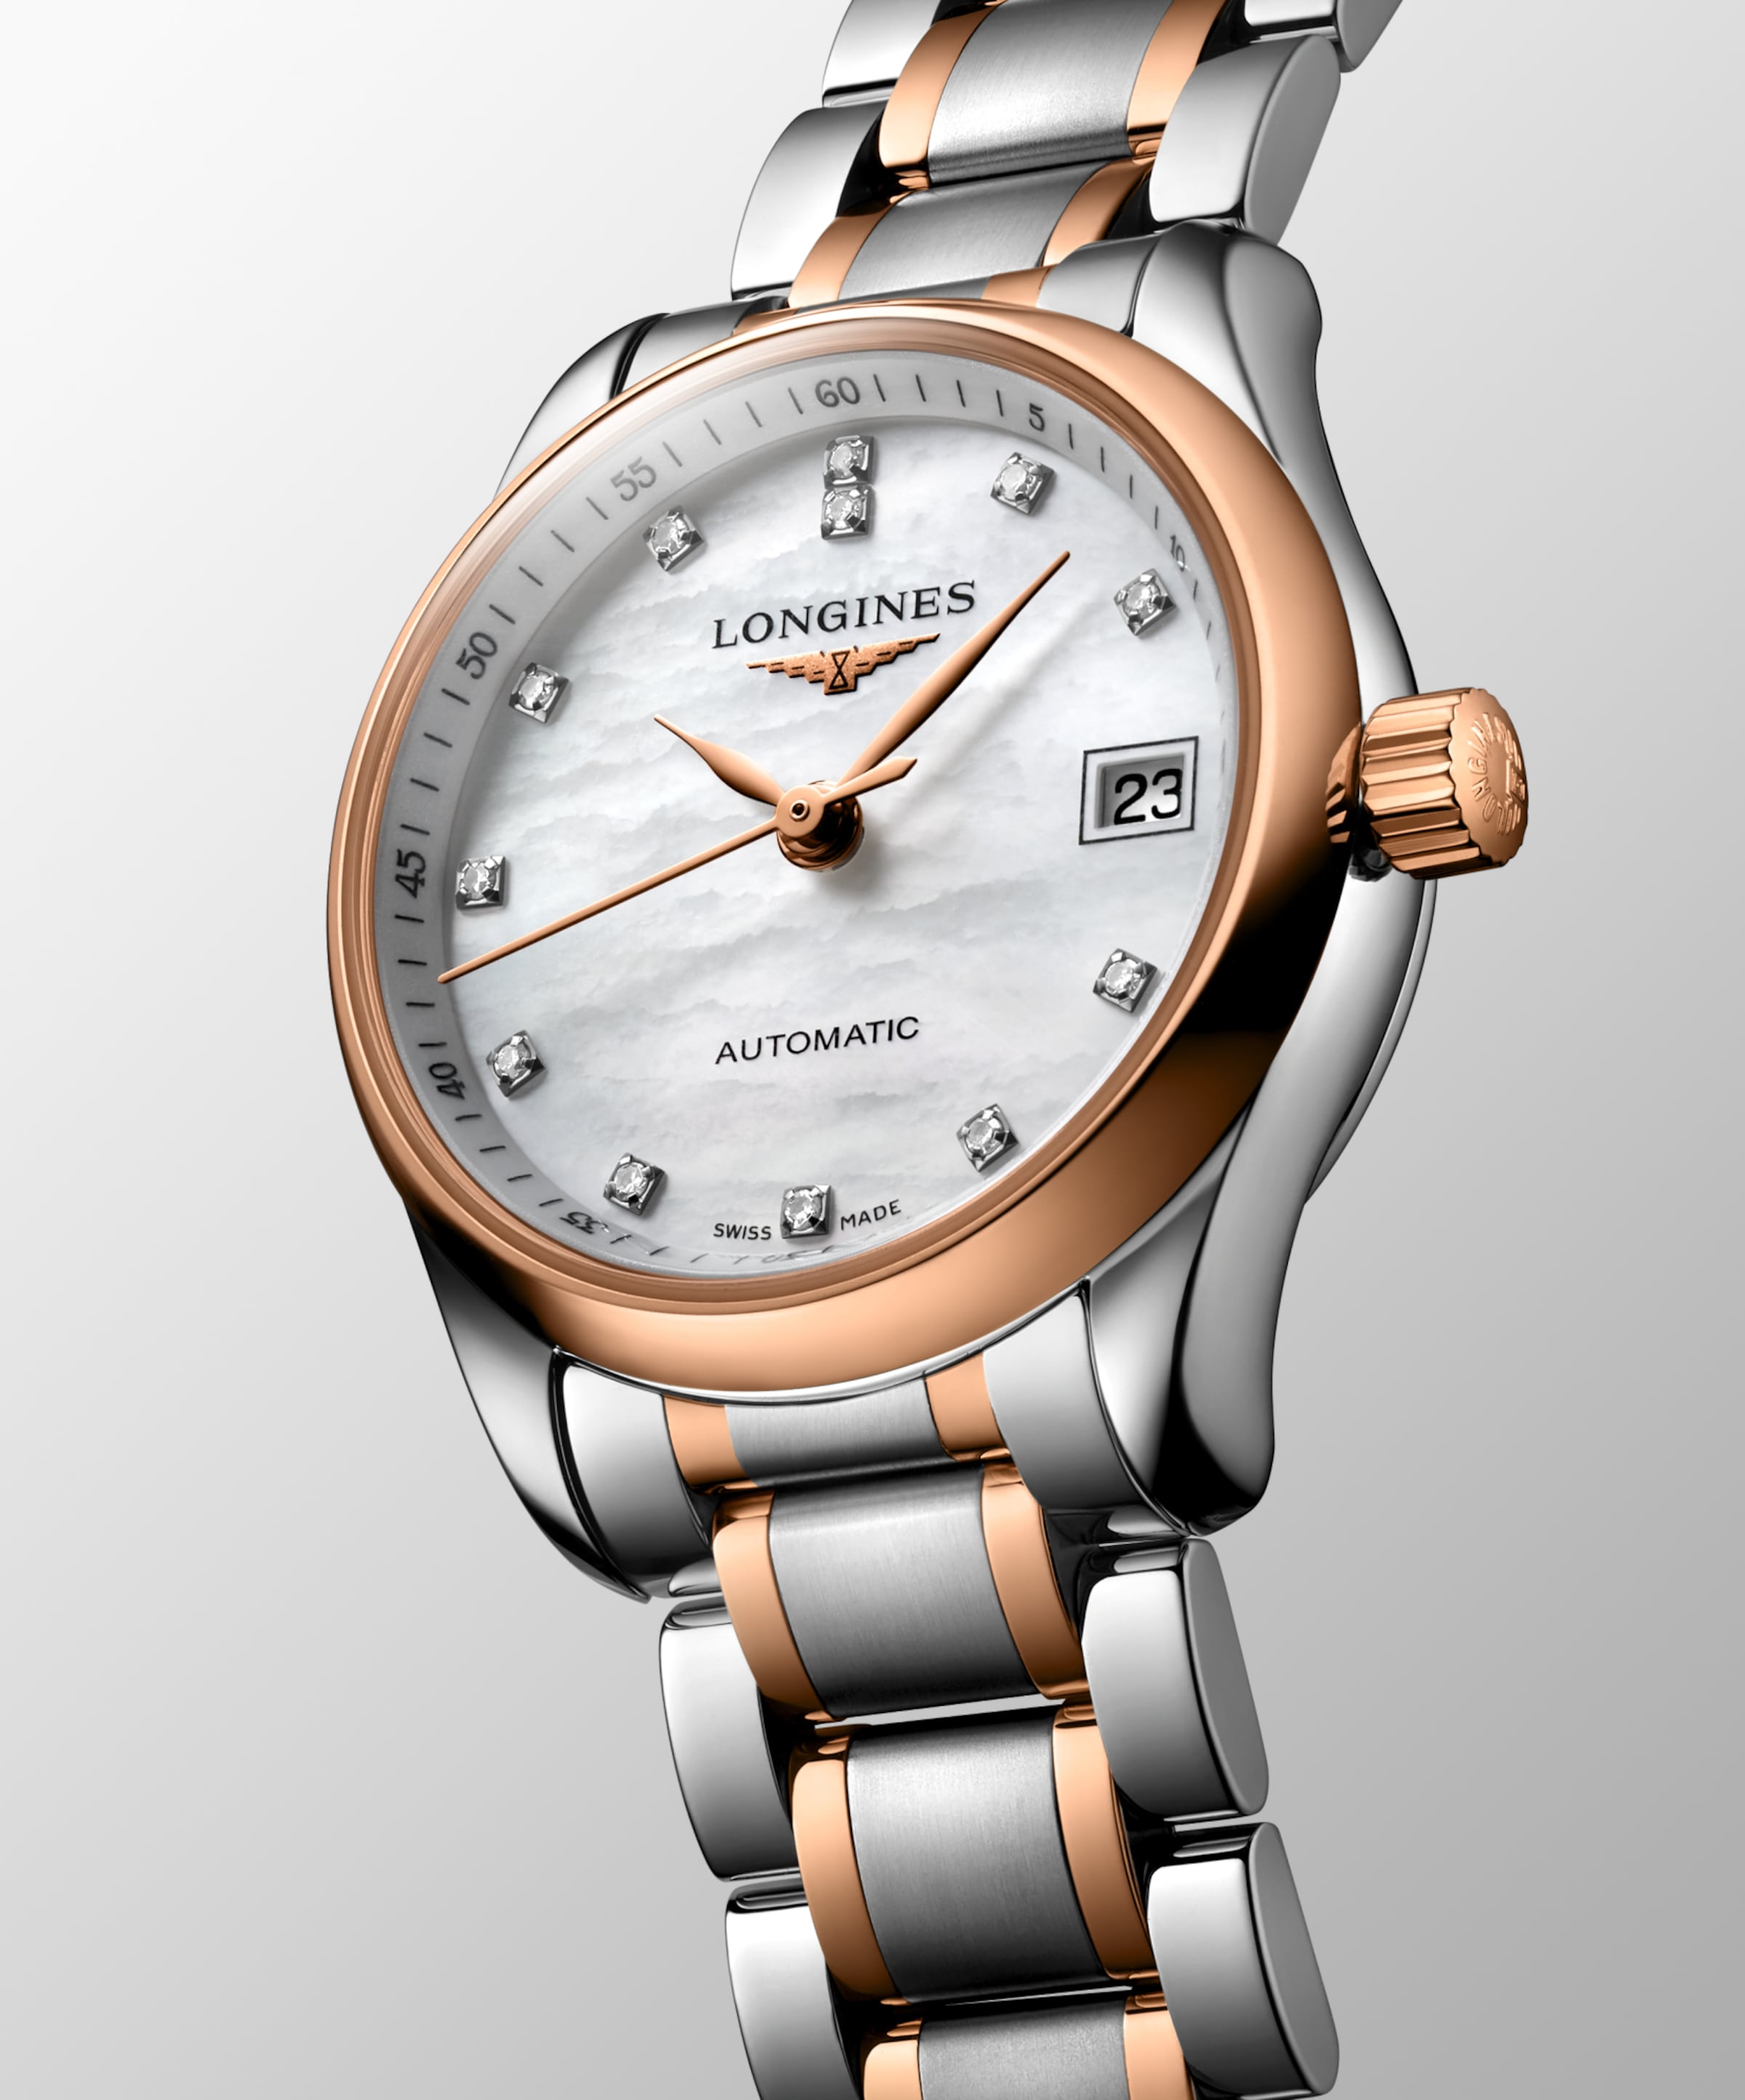 Longines MASTER COLLECTION Automatic Stainless steel and 18 karat pink gold Watch - L2.128.5.89.7